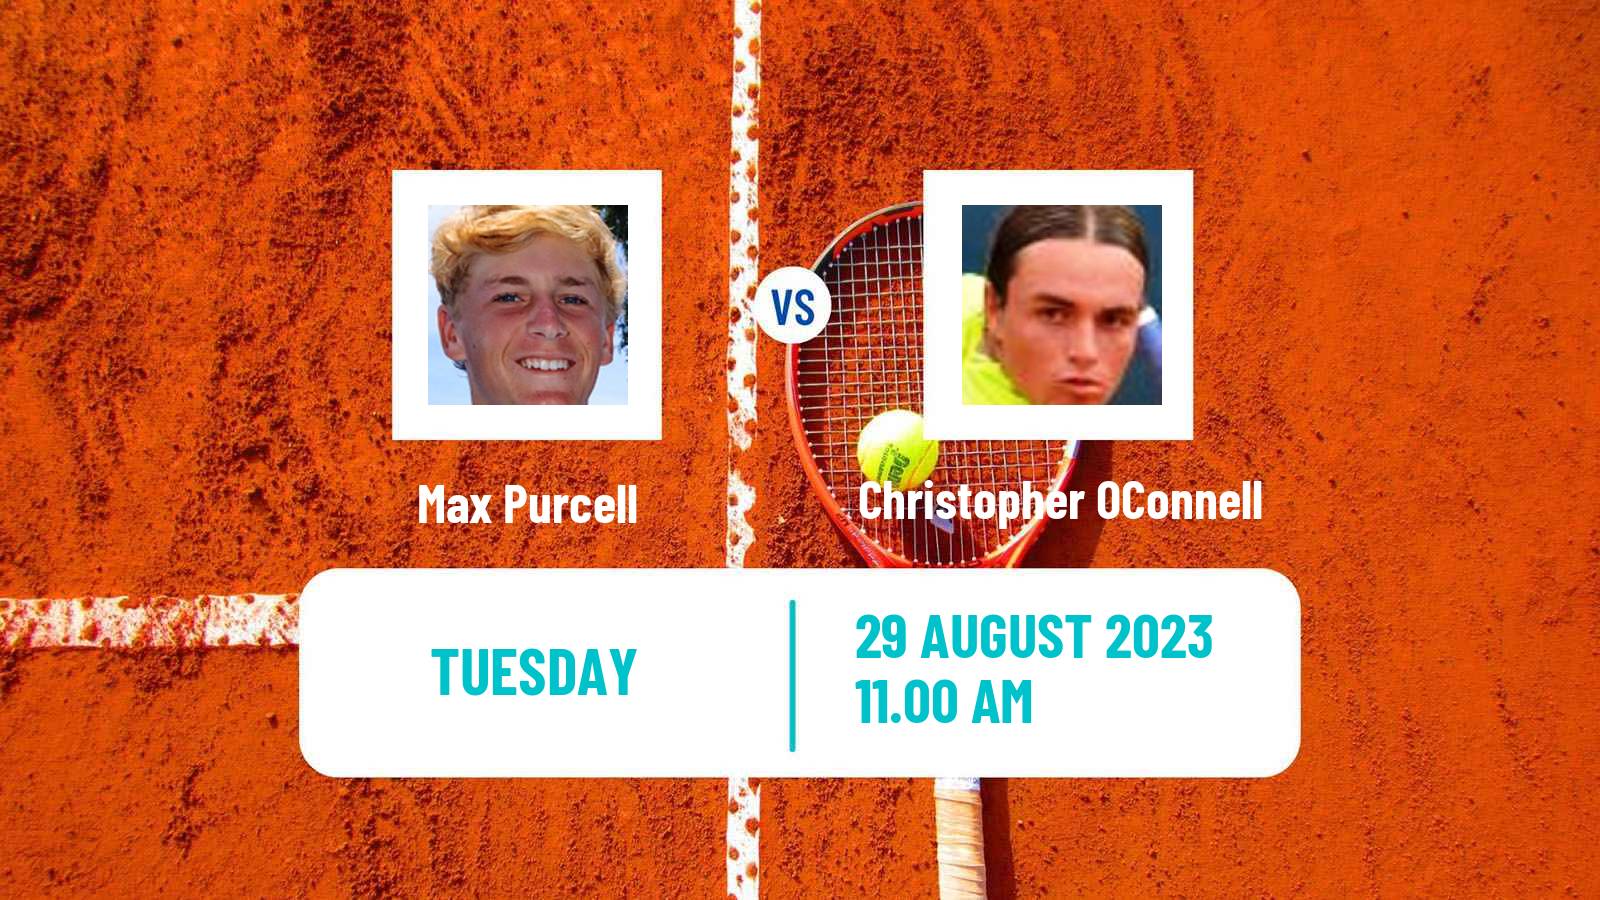 Tennis ATP US Open Max Purcell - Christopher OConnell